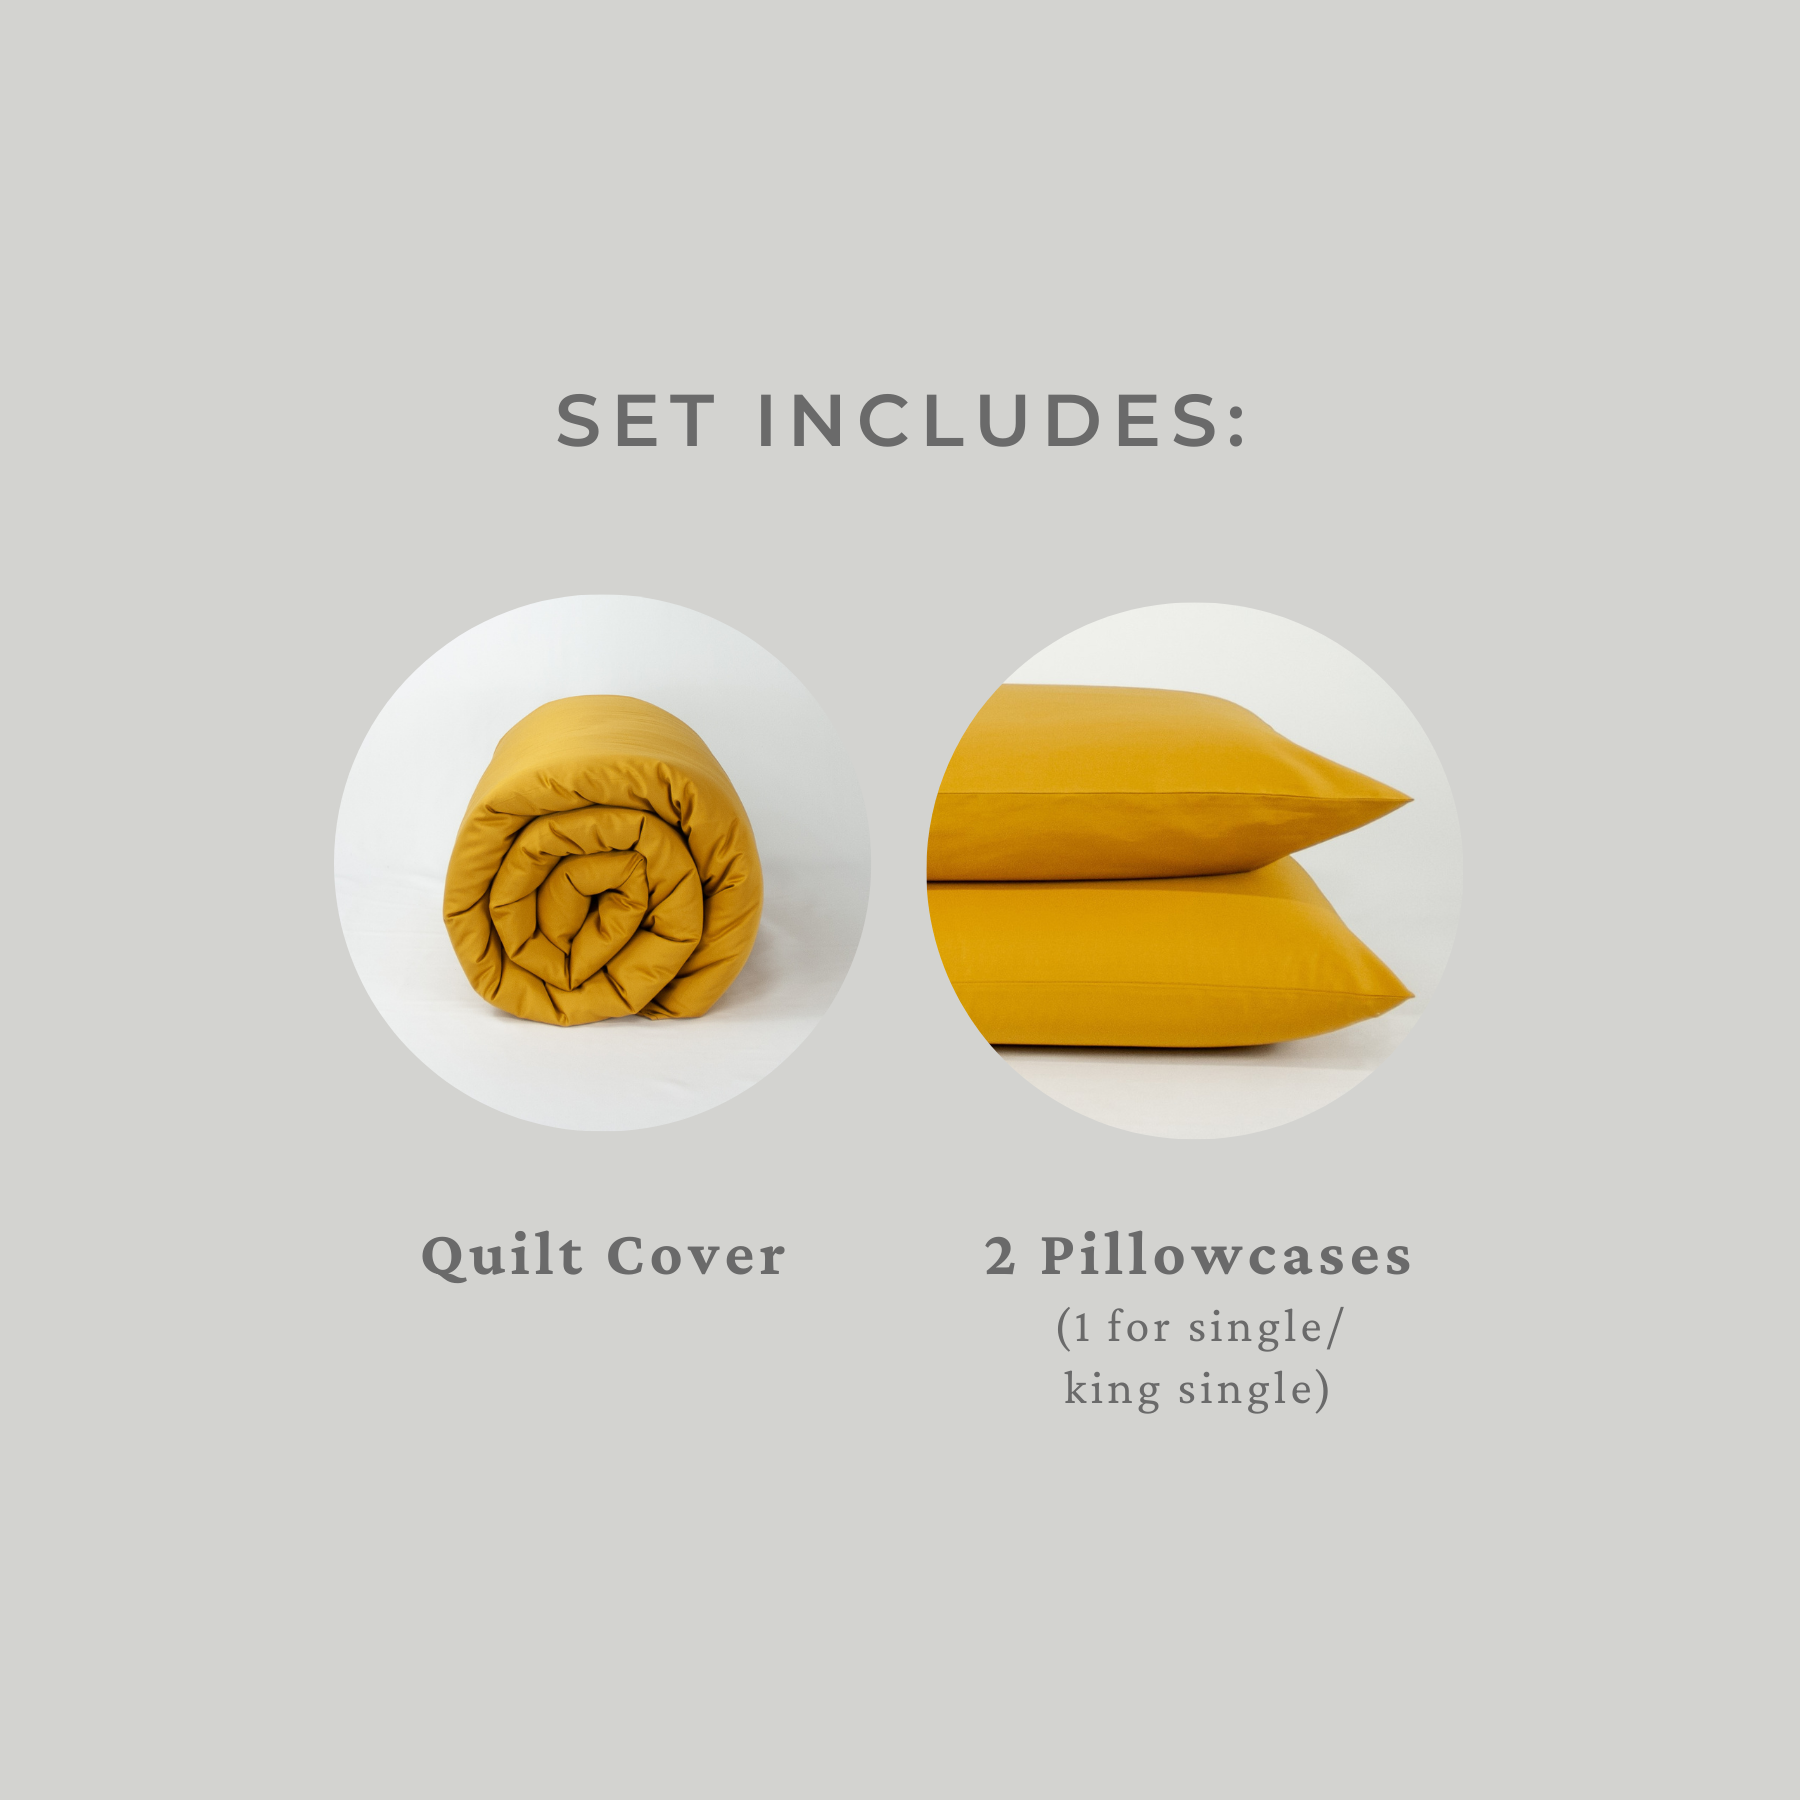 Set includes: Quilt cover and two pillowcases (1 for single or king single)